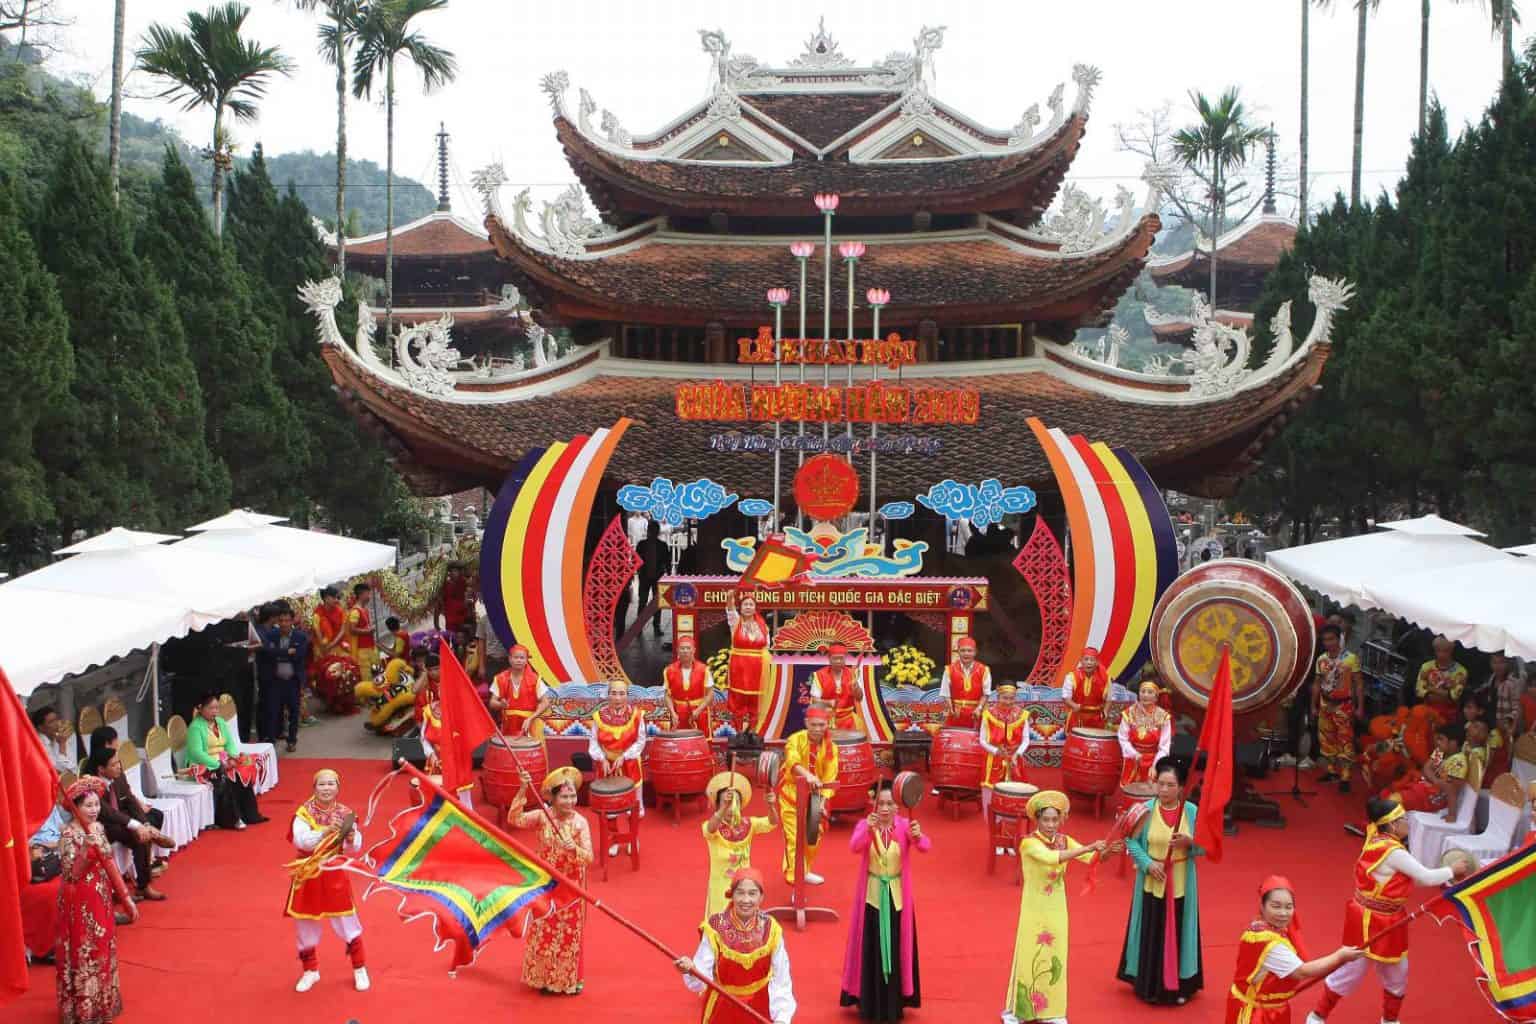 List of Top 5 Most Famous Spring Festivals in Vietnam